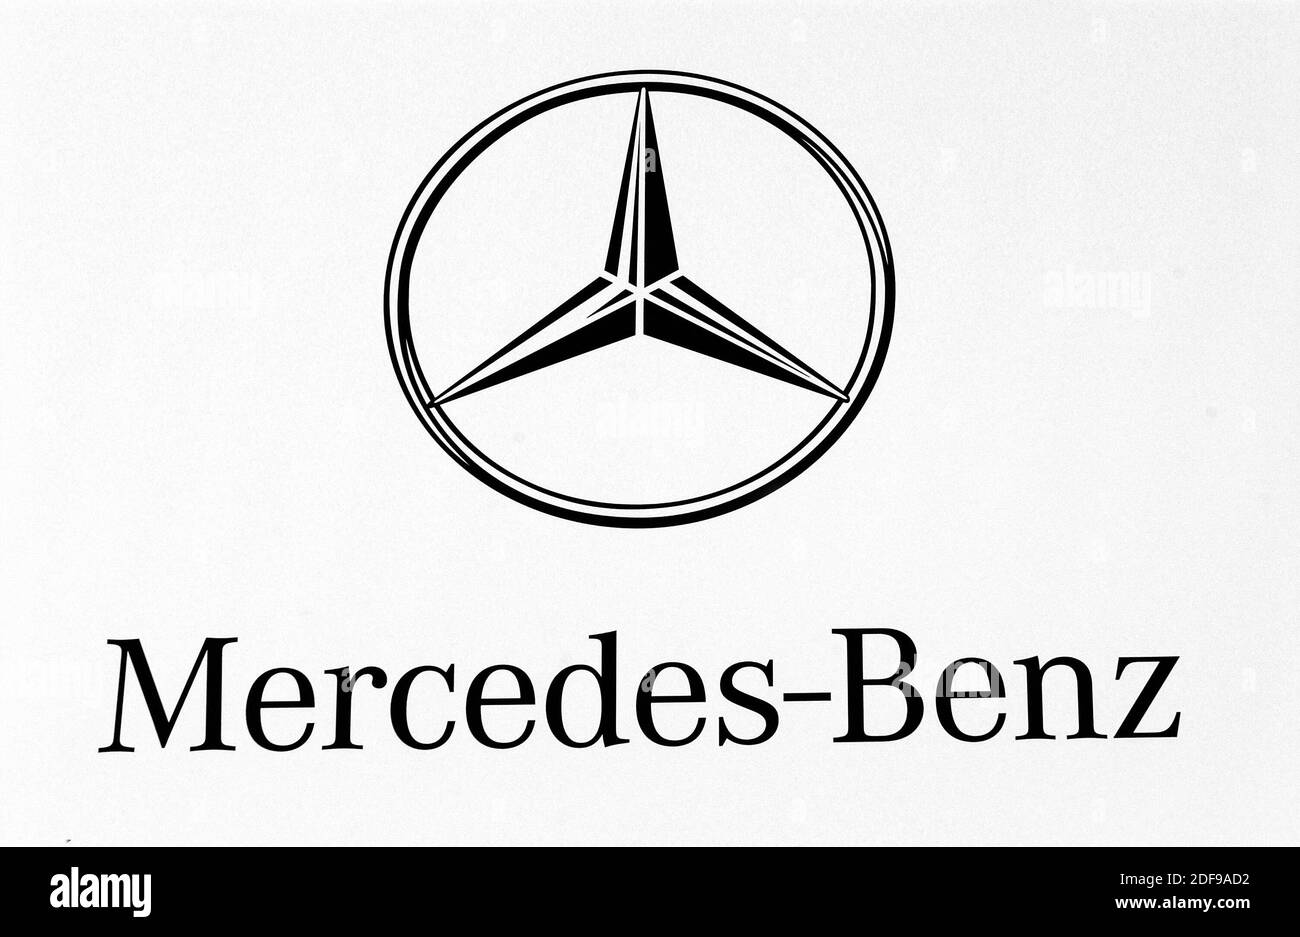 File photo dated September 25, 2004 of German car maker Mercedes Benz’ logo at the Mondial de l'Automobile held in Paris, France. On Wednesday of last week, Chancellor Angela Merkel and Germany’s sixteen federal states decided to take little steps back to normality after a coronavirus break of four weeks. Shops with a size of up to 800 square meters got the permission to reopen today, on April 20th, 2020 including car dealerships after a Coronavirus break of four weeks. Photo by Giancarlo Gorassini/ABACA. Stock Photo